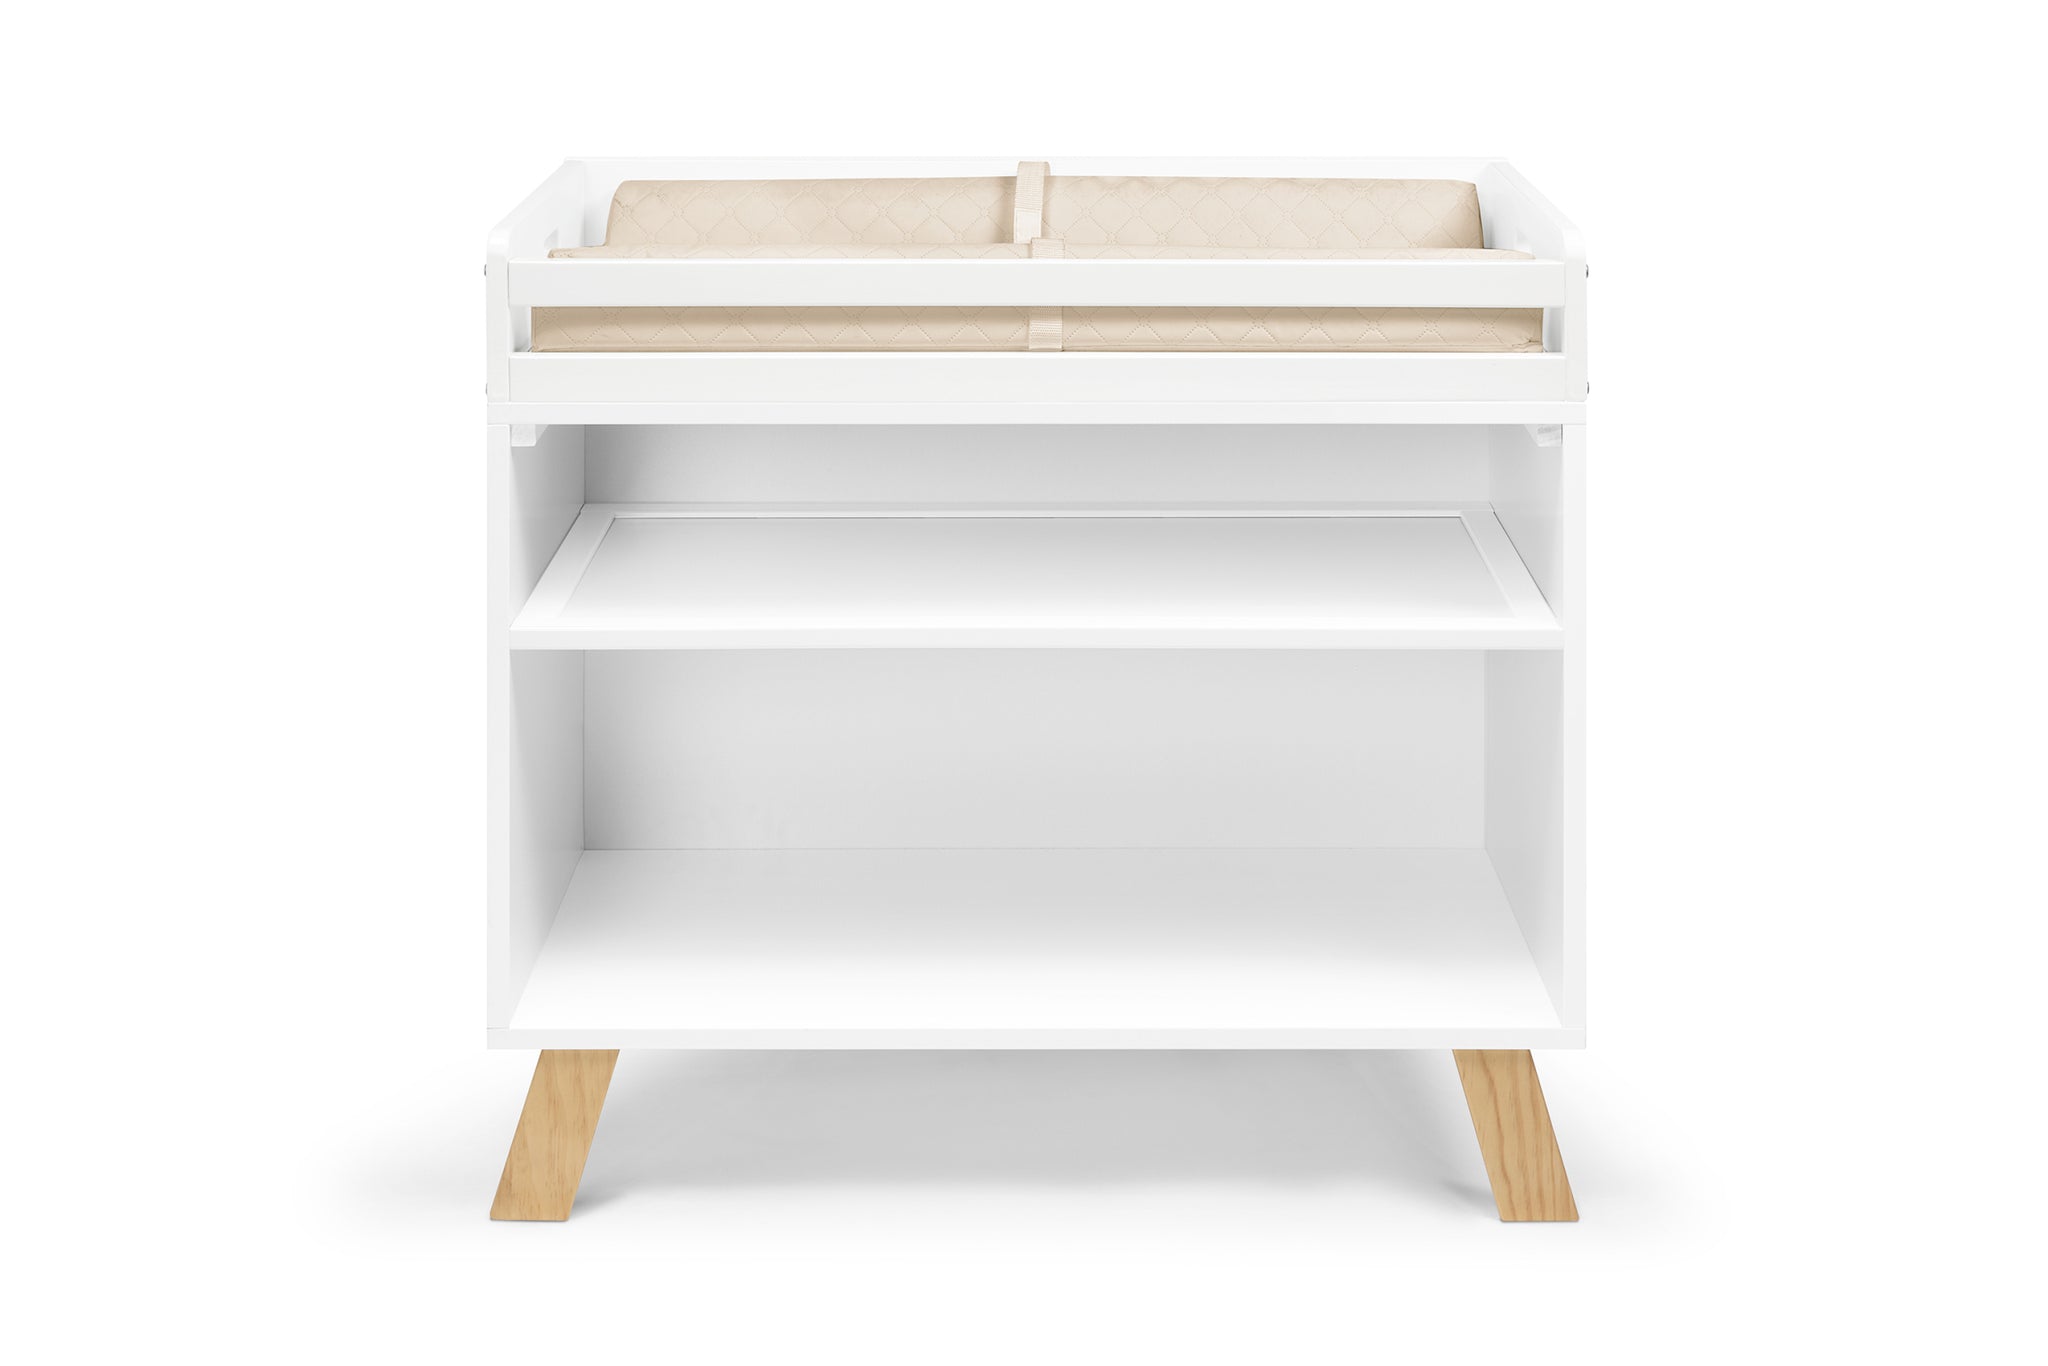 Livia Multi Purpose Changing Table White Natural white-solid wood